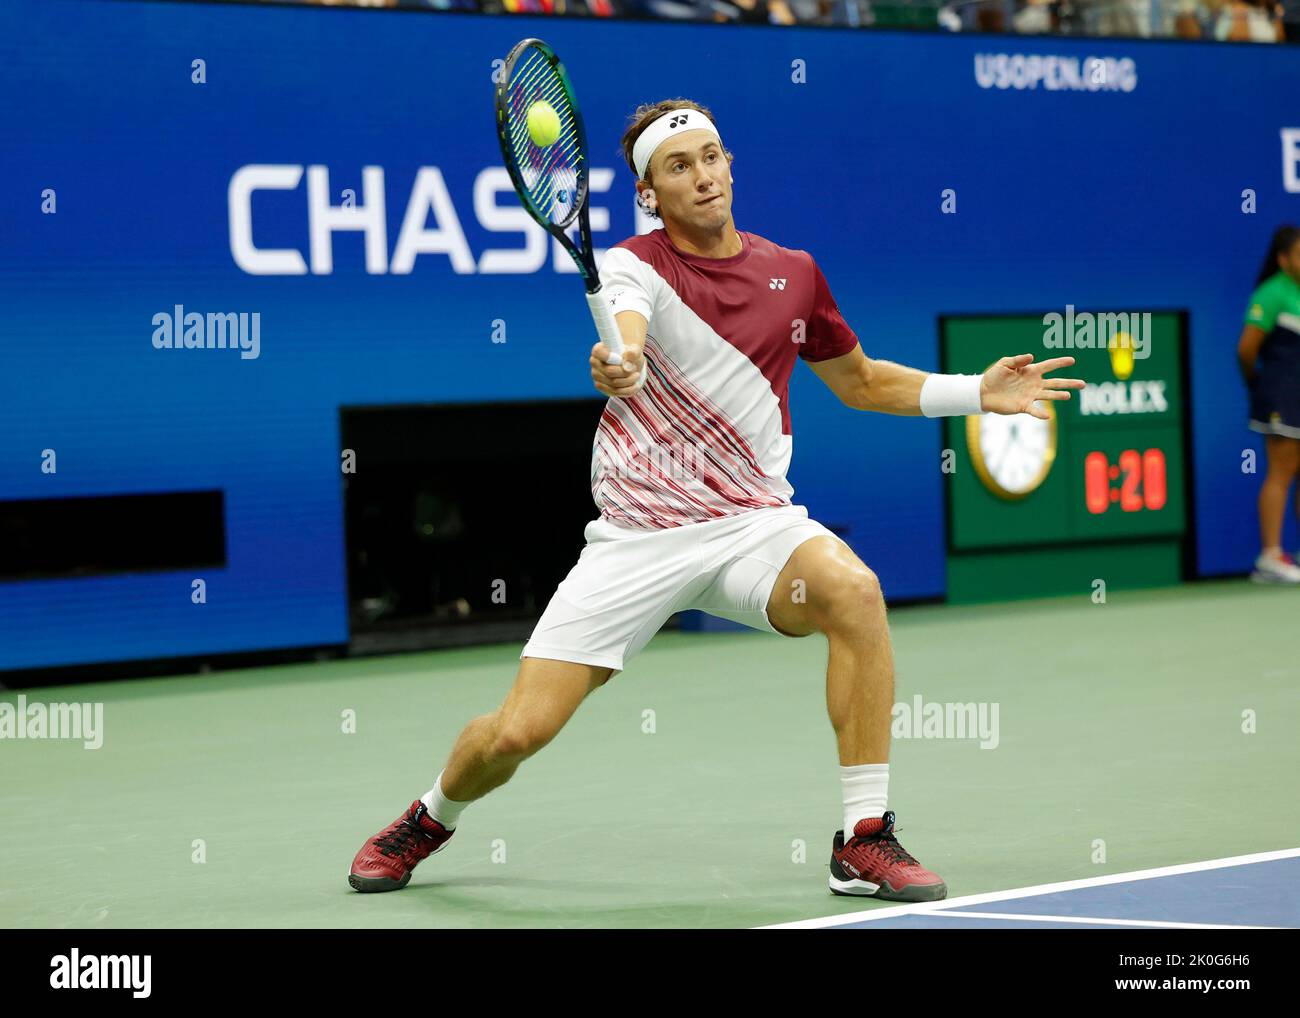 New York, USA, 11th. September 2022. Norwegian tennis player Casper Ruud  in action during the Men’s Final of the  US  Open  Championships, Billie Jean King National Tennis Center on Sunday 11 September 2022. © Juergen Hasenkopf / Alamy Live News Stock Photo